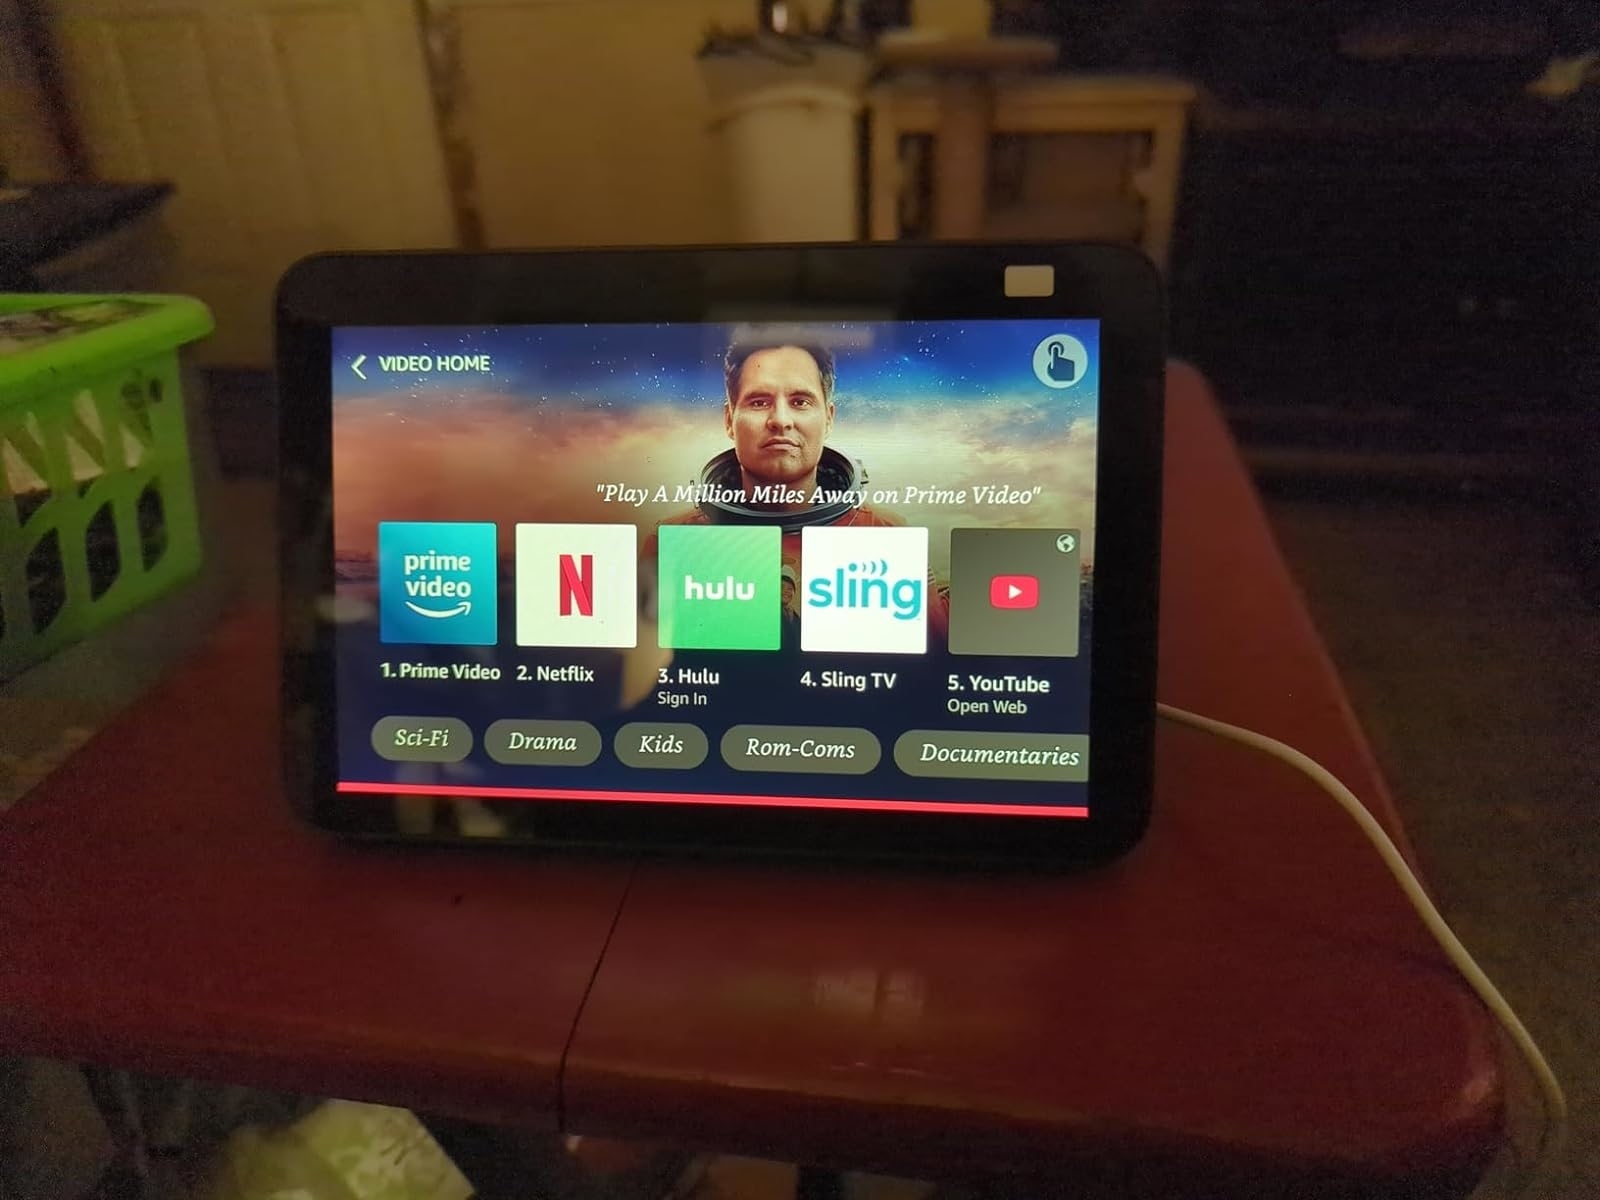 a reviewer&#x27;s echo show with streaming services pulled up